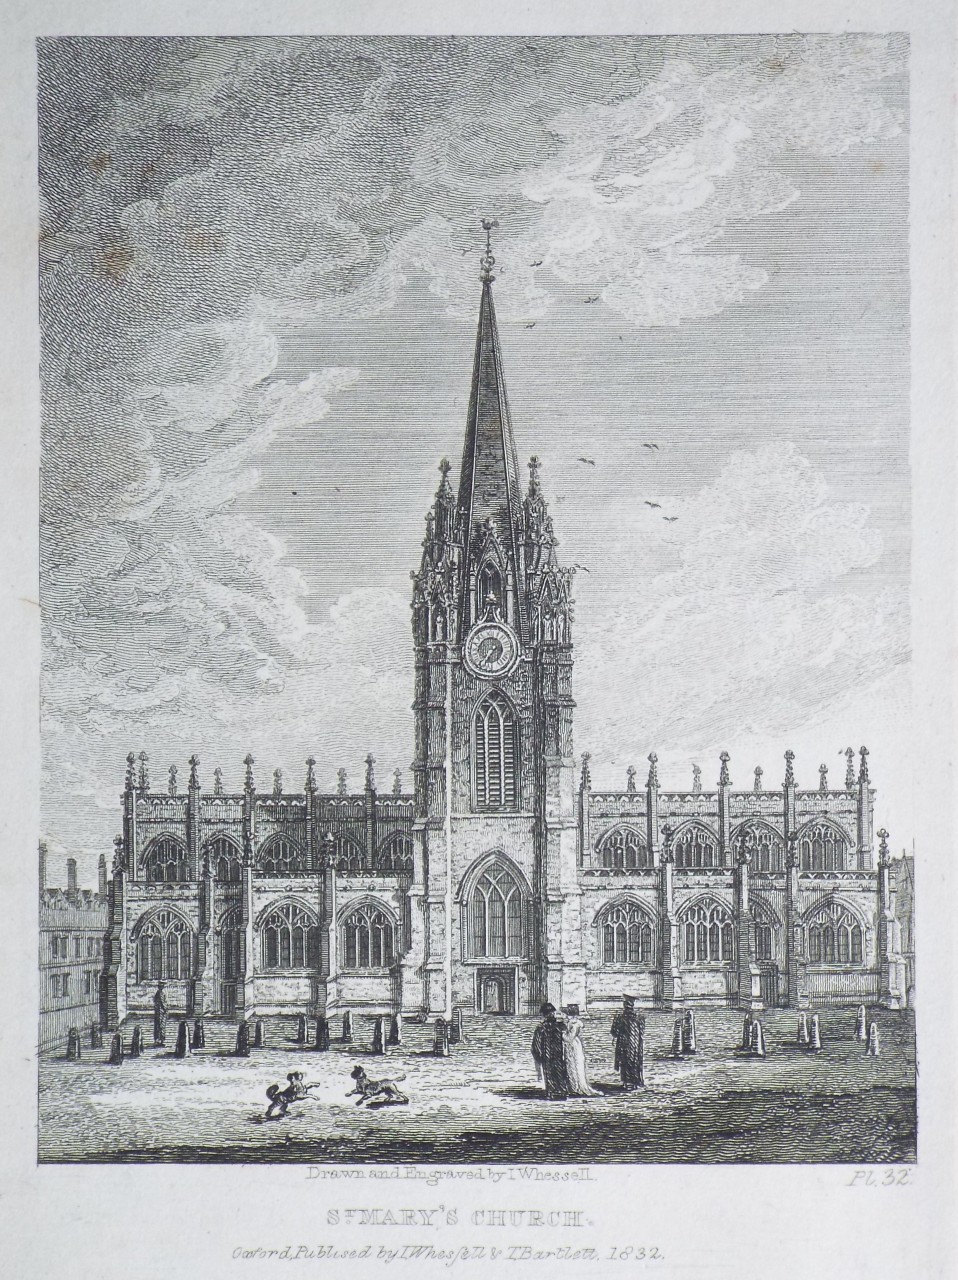 Print - St. Mary's Church. - Whessell